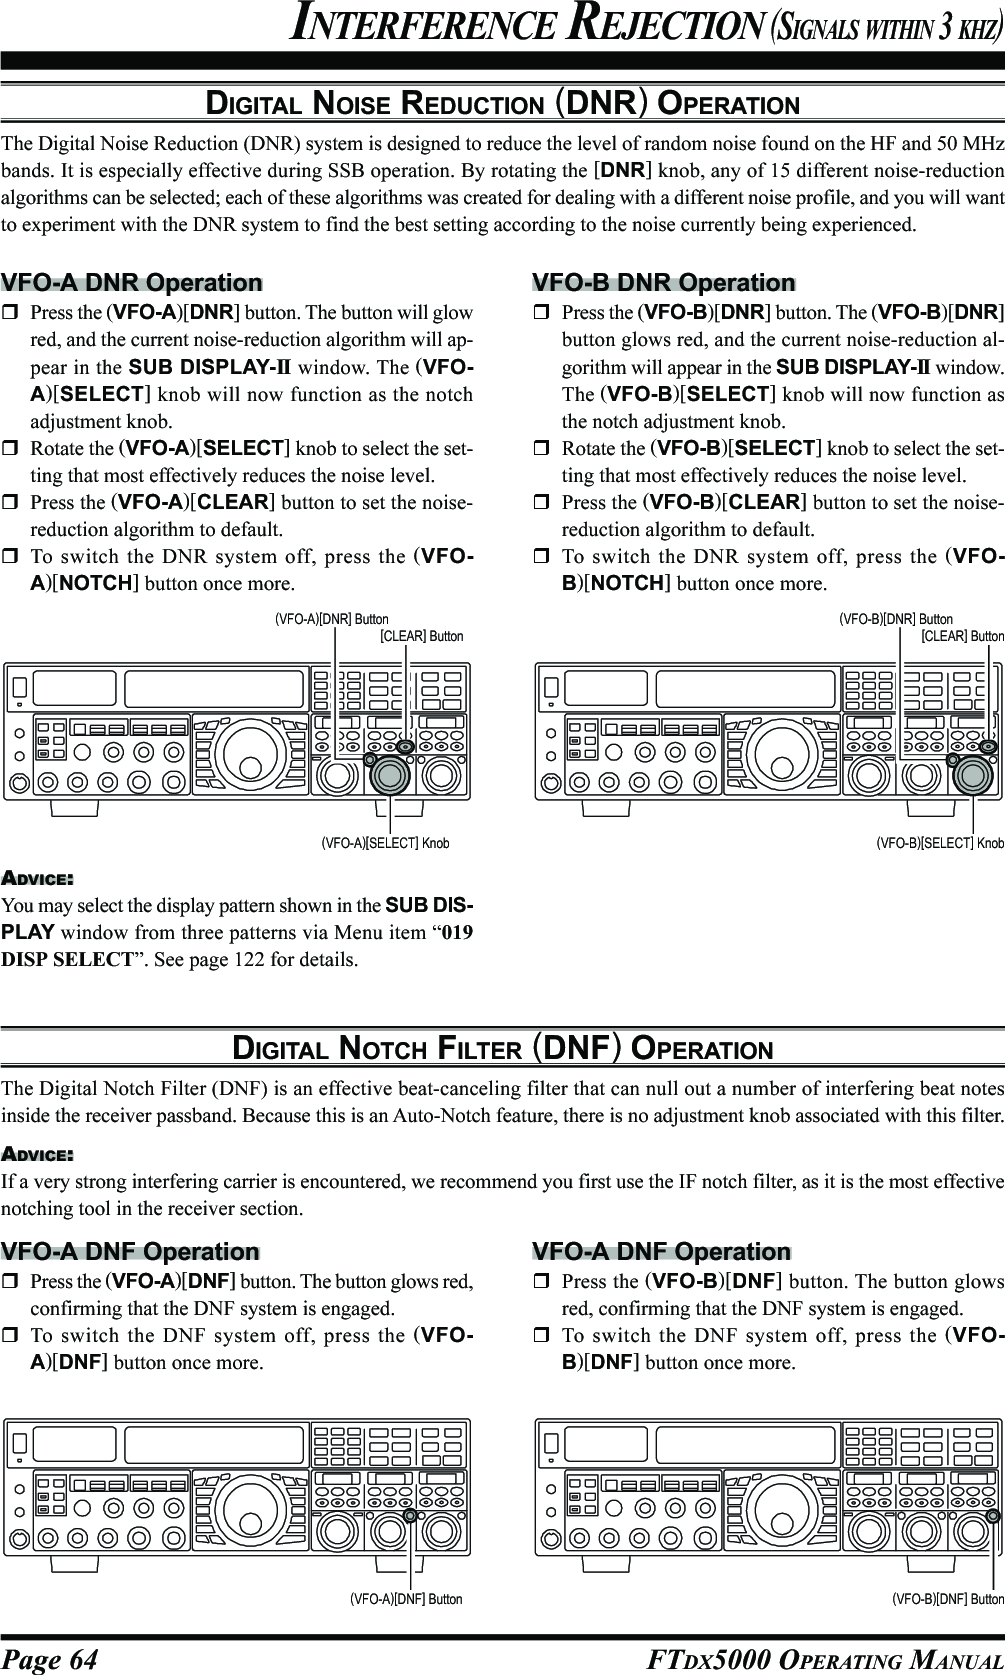 Page 64 FTDX5000 OPERATING MANUALDIGITAL NOISE REDUCTION (DNR) OPERATIONThe Digital Noise Reduction (DNR) system is designed to reduce the level of random noise found on the HF and 50 MHzbands. It is especially effective during SSB operation. By rotating the [DNR] knob, any of 15 different noise-reductionalgorithms can be selected; each of these algorithms was created for dealing with a different noise profile, and you will wantto experiment with the DNR system to find the best setting according to the noise currently being experienced.INTERFERENCE REJECTION (SIGNALS WITHIN 3 KHZ)VFO-A DNR OperationPress the (VFO-A)[DNR] button. The button will glowred, and the current noise-reduction algorithm will ap-pear in the SUB DISPLAY-II  window. The (VFO-A)[SELECT] knob will now function as the notchadjustment knob.Rotate the (VFO-A)[SELECT] knob to select the set-ting that most effectively reduces the noise level.Press the (VFO-A)[CLEAR] button to set the noise-reduction algorithm to default.To switch the DNR system off, press the (VFO-A)[NOTCH] button once more.DIGITAL NOTCH FILTER (DNF) OPERATIONThe Digital Notch Filter (DNF) is an effective beat-canceling filter that can null out a number of interfering beat notesinside the receiver passband. Because this is an Auto-Notch feature, there is no adjustment knob associated with this filter.ADVICE:If a very strong interfering carrier is encountered, we recommend you first use the IF notch filter, as it is the most effectivenotching tool in the receiver section.VFO-A DNF OperationPress the (VFO-A)[DNF] button. The button glows red,confirming that the DNF system is engaged.To switch the DNF system off, press the (VFO-A)[DNF] button once more.VFO-B DNR OperationPress the (VFO-B)[DNR] button. The (VFO-B)[DNR]button glows red, and the current noise-reduction al-gorithm will appear in the SUB DISPLAY-II  window.The (VFO-B)[SELECT] knob will now function asthe notch adjustment knob.Rotate the (VFO-B)[SELECT] knob to select the set-ting that most effectively reduces the noise level.Press the (VFO-B)[CLEAR] button to set the noise-reduction algorithm to default.To switch the DNR system off, press the (VFO-B)[NOTCH] button once more.(VFO-A)[SELECT] Knob (VFO-B)[SELECT] Knob(VFO-B)[DNR] Button[CLEAR] Button(VFO-A)[DNR] Button[CLEAR] Button(VFO-A)[DNF] Button (VFO-B)[DNF] ButtonVFO-A DNF OperationPress the (VFO-B)[DNF] button. The button glowsred, confirming that the DNF system is engaged.To switch the DNF system off, press the (VFO-B)[DNF] button once more.ADVICE:You may select the display pattern shown in the SUB DIS-PLAY window from three patterns via Menu item “019DISP SELECT”. See page 122 for details.